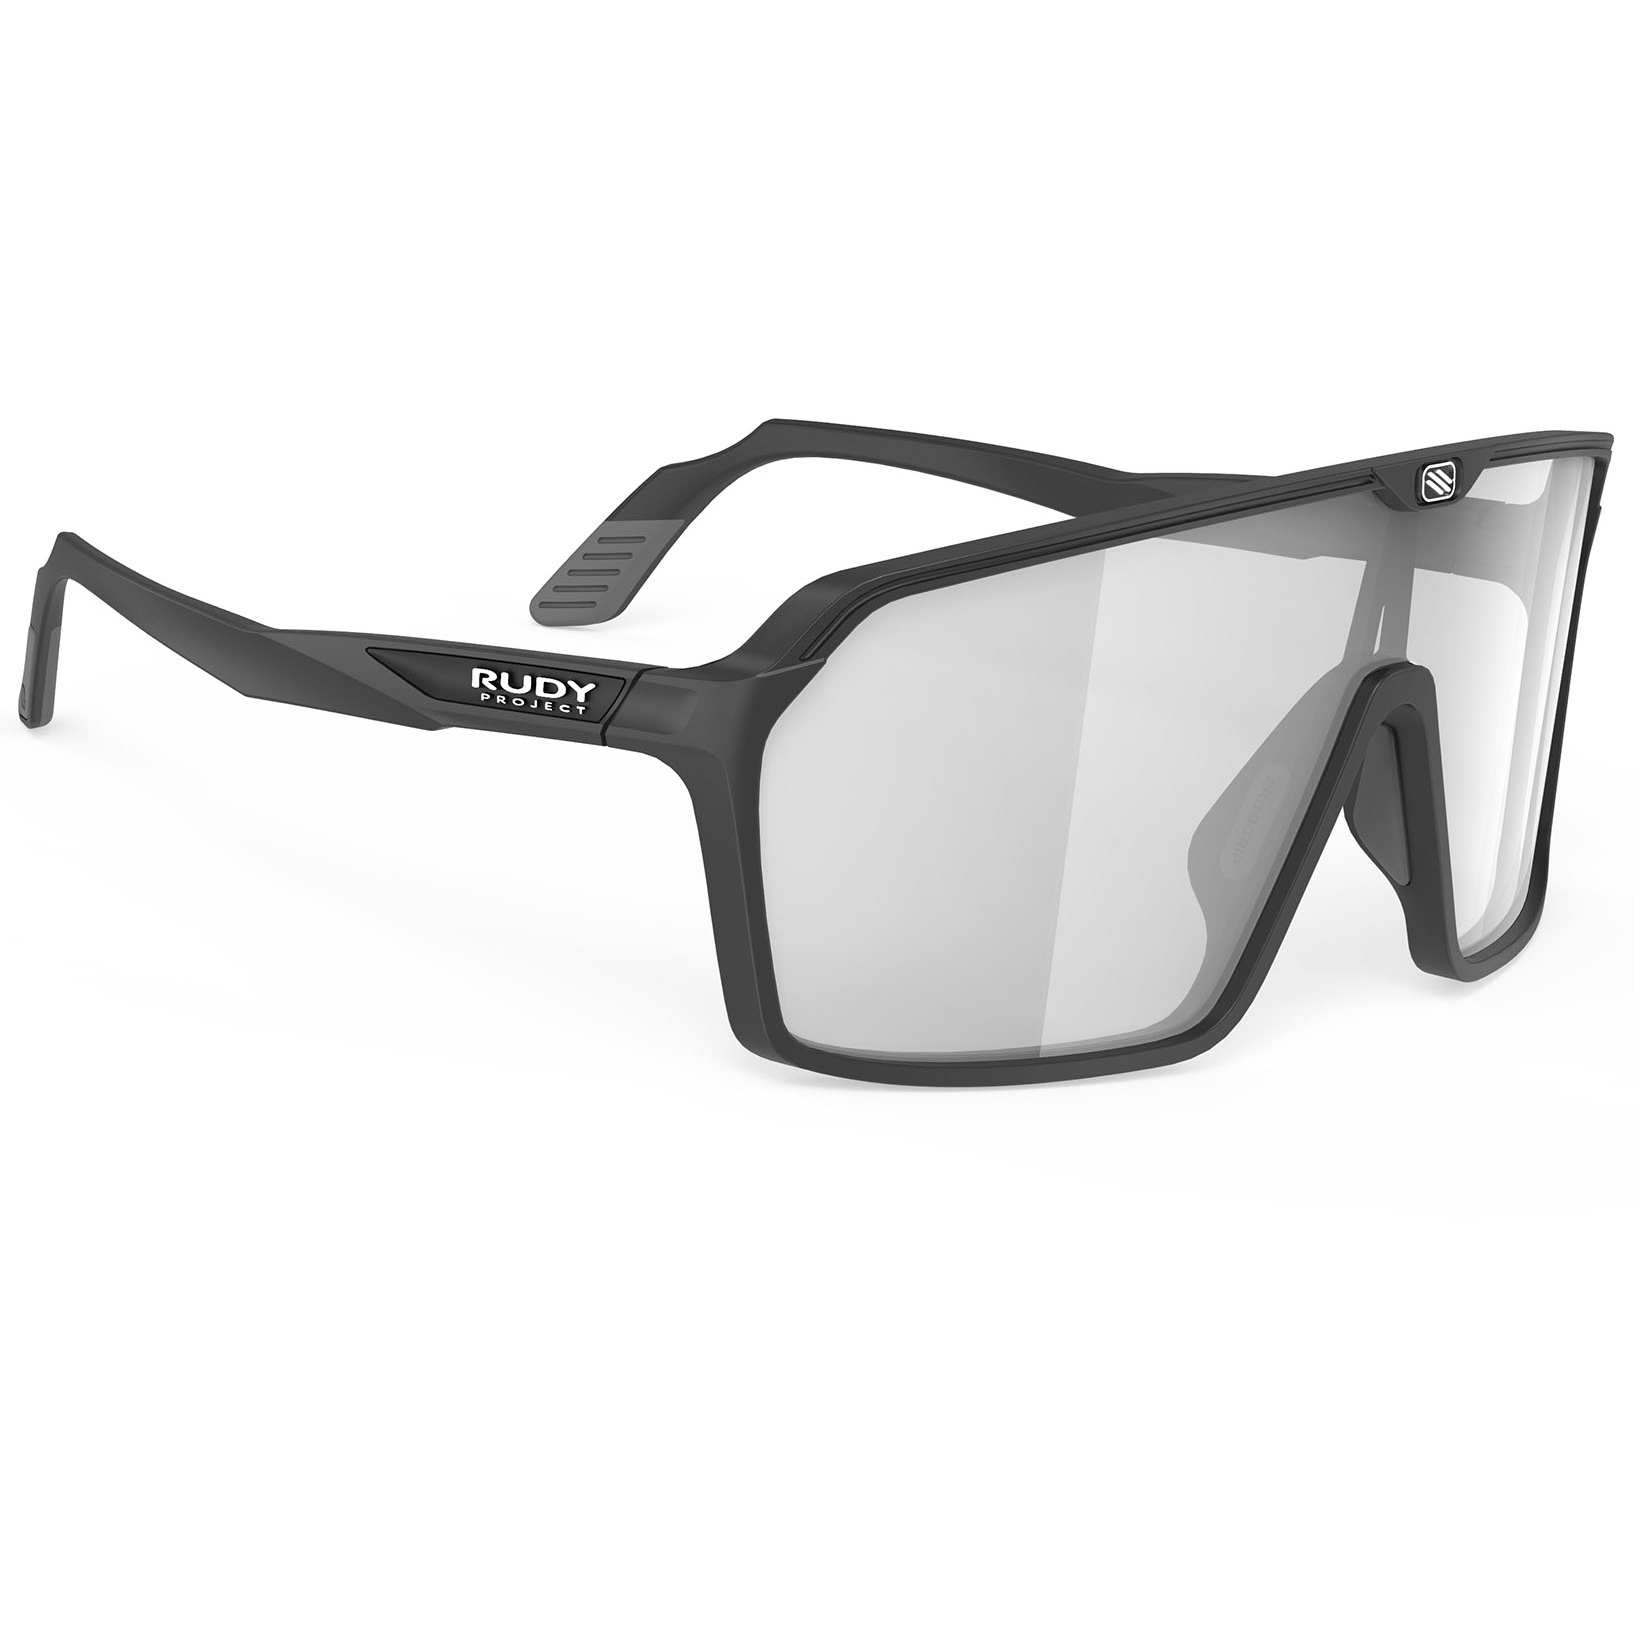 Picture of Rudy Project Spinshield Photochromic Glasses - Black Matte/ImpactX 2 Laser Black